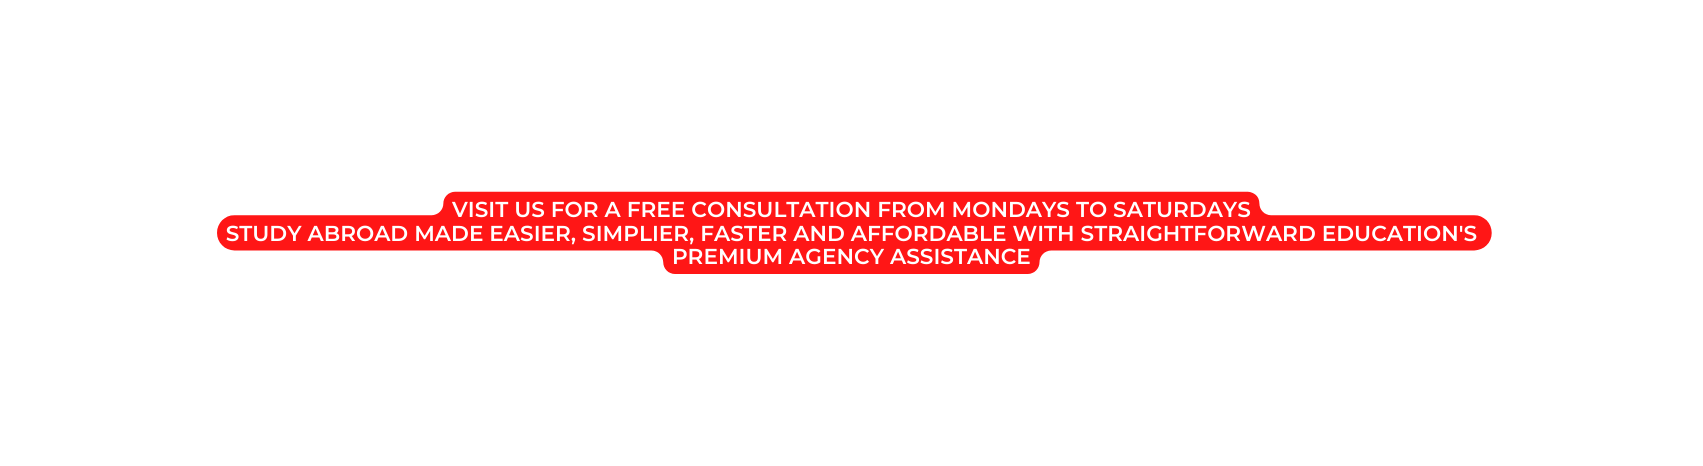 VISit us for a FREE CONSULTATION from mondays to saturdays Study abroad made EASIER SIMPLIER faster and affordable with straightforward education s premium agency assistance